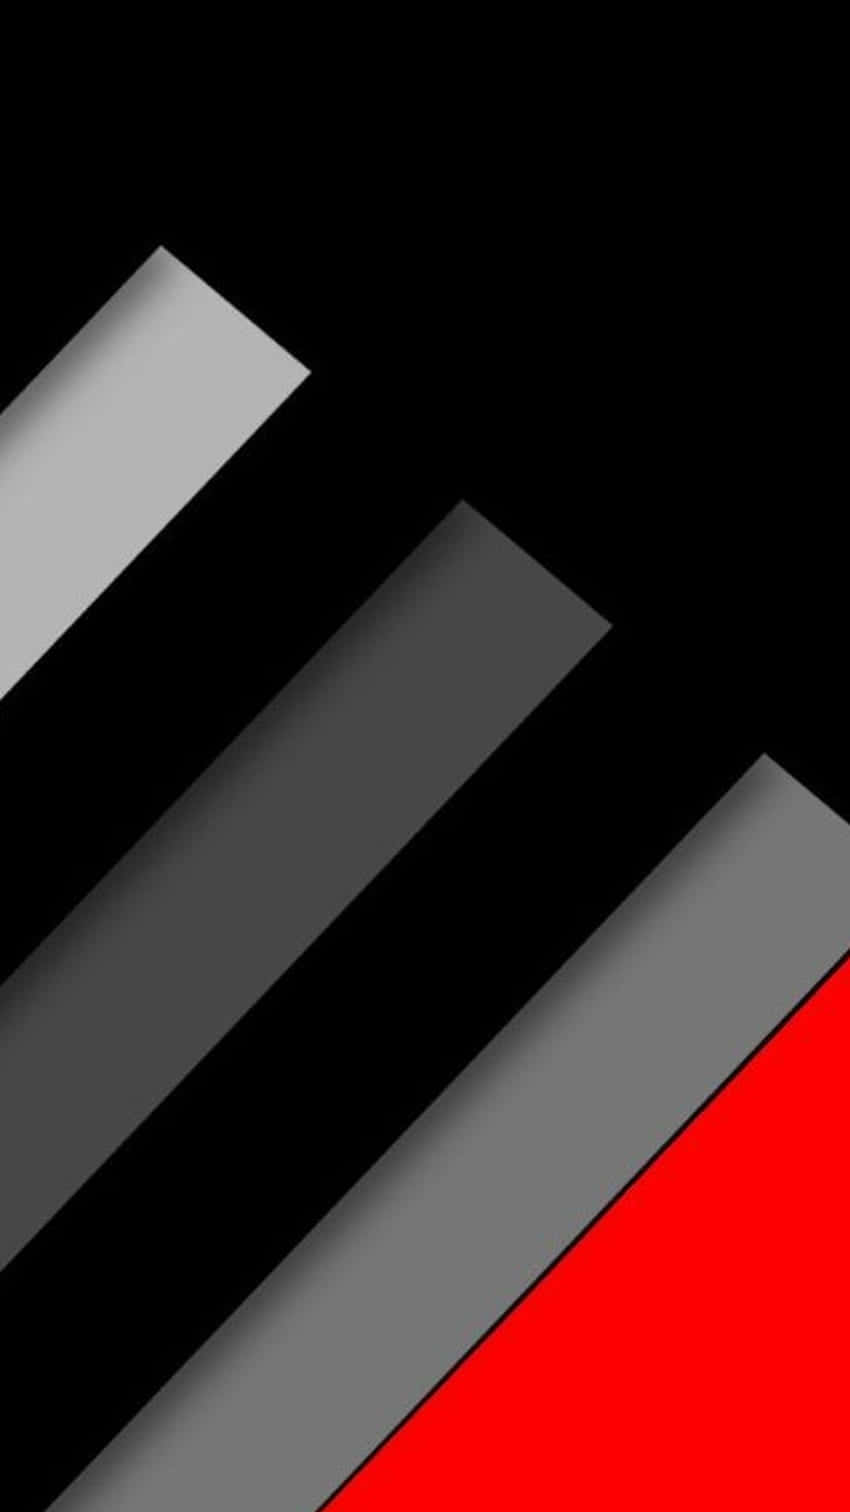 "A Combination of Red, White, and Black Creates a Unique Abstract" Wallpaper